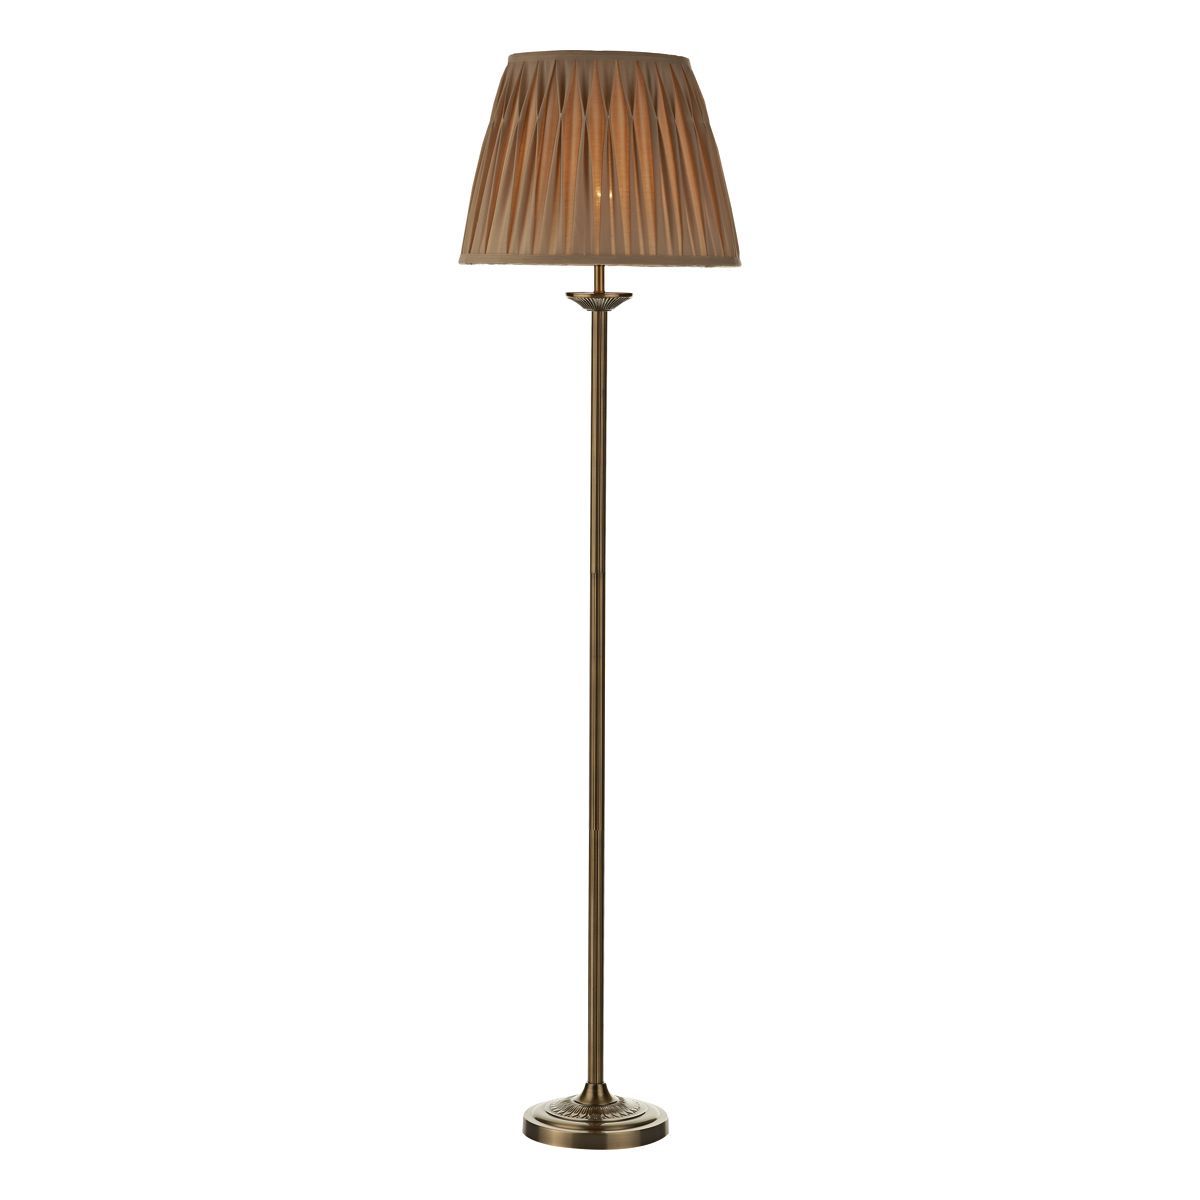 Hatton Floor Lamp Antique Brass Complete With Shade Intended For Antique Brass Floor Lamps (View 10 of 20)